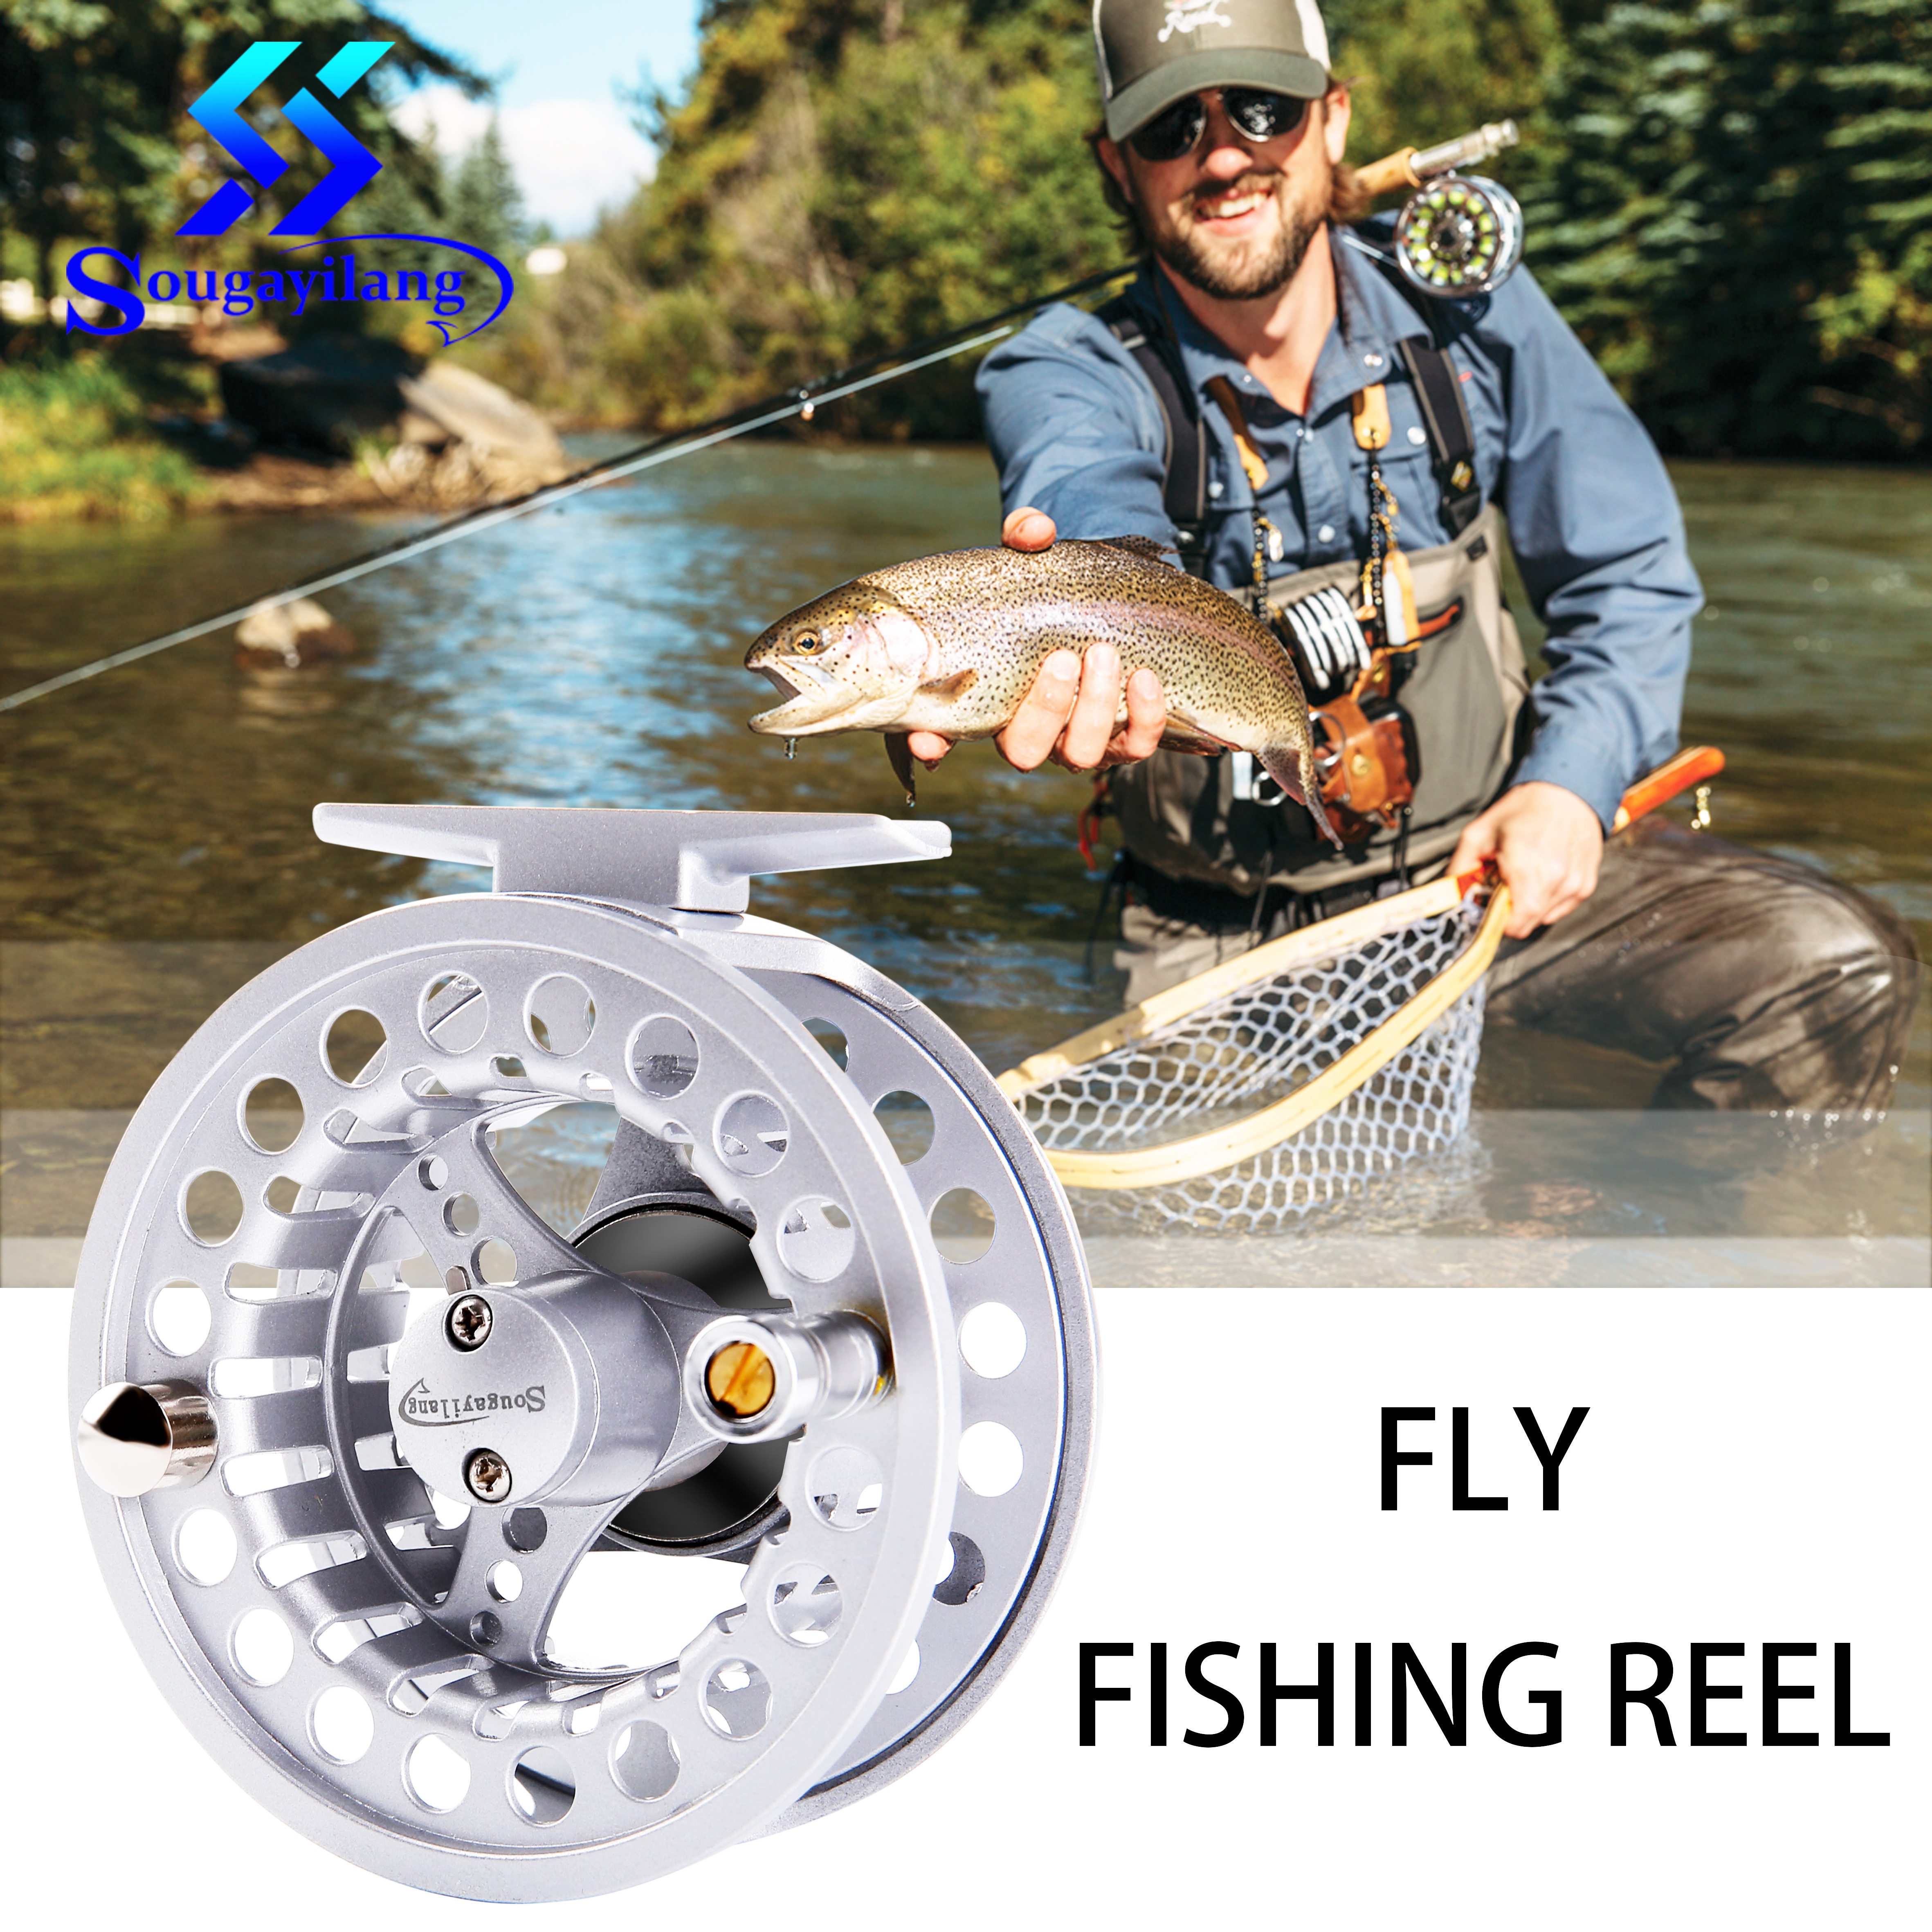 

Sougayilang Fly Fishing Reel 5/6 Ambidextrous Stainless Steel Main Shaft And Handle Large Arbor Aluminum Spool Fly Reel With Spool For Stream Fishing Rod Tool Fly Fishing Reel Wheel Accessories